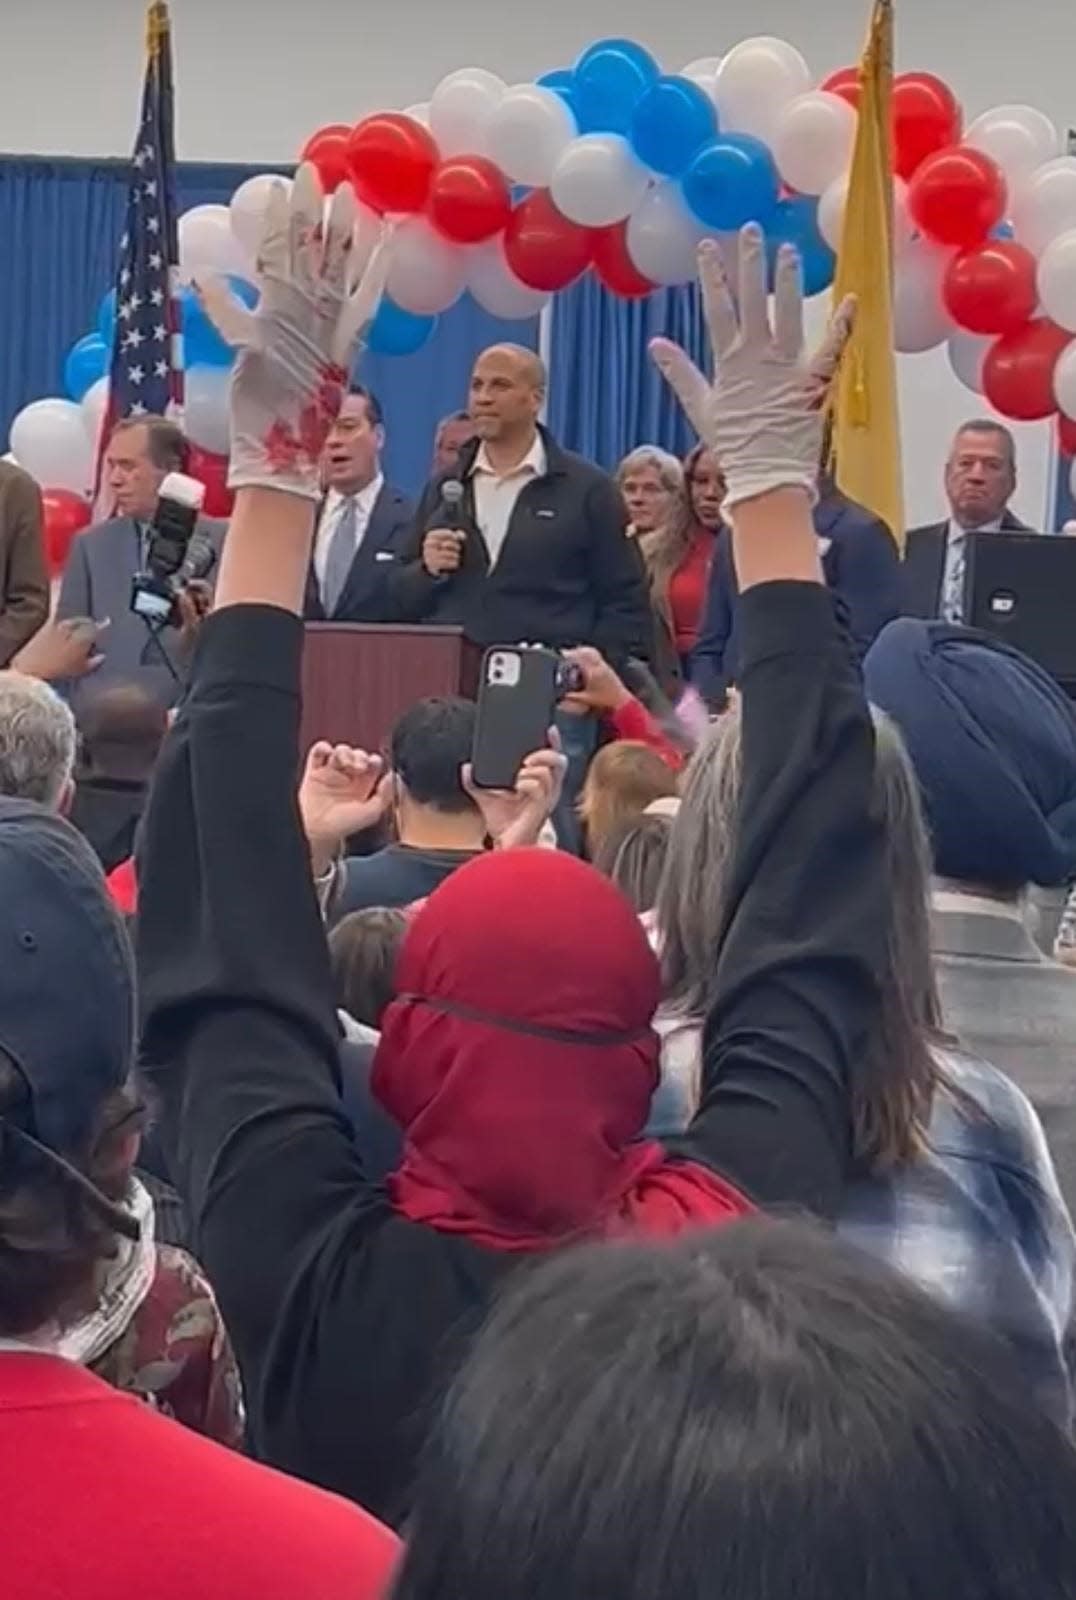 Sen. Cory Booker was met with protest during an election event on Sunday, Nov. 5, in South Brunswick. Protesters shouted "ceasefire now" and held up red-dyed hands to symbolize more than 10,000 Gazans killed.